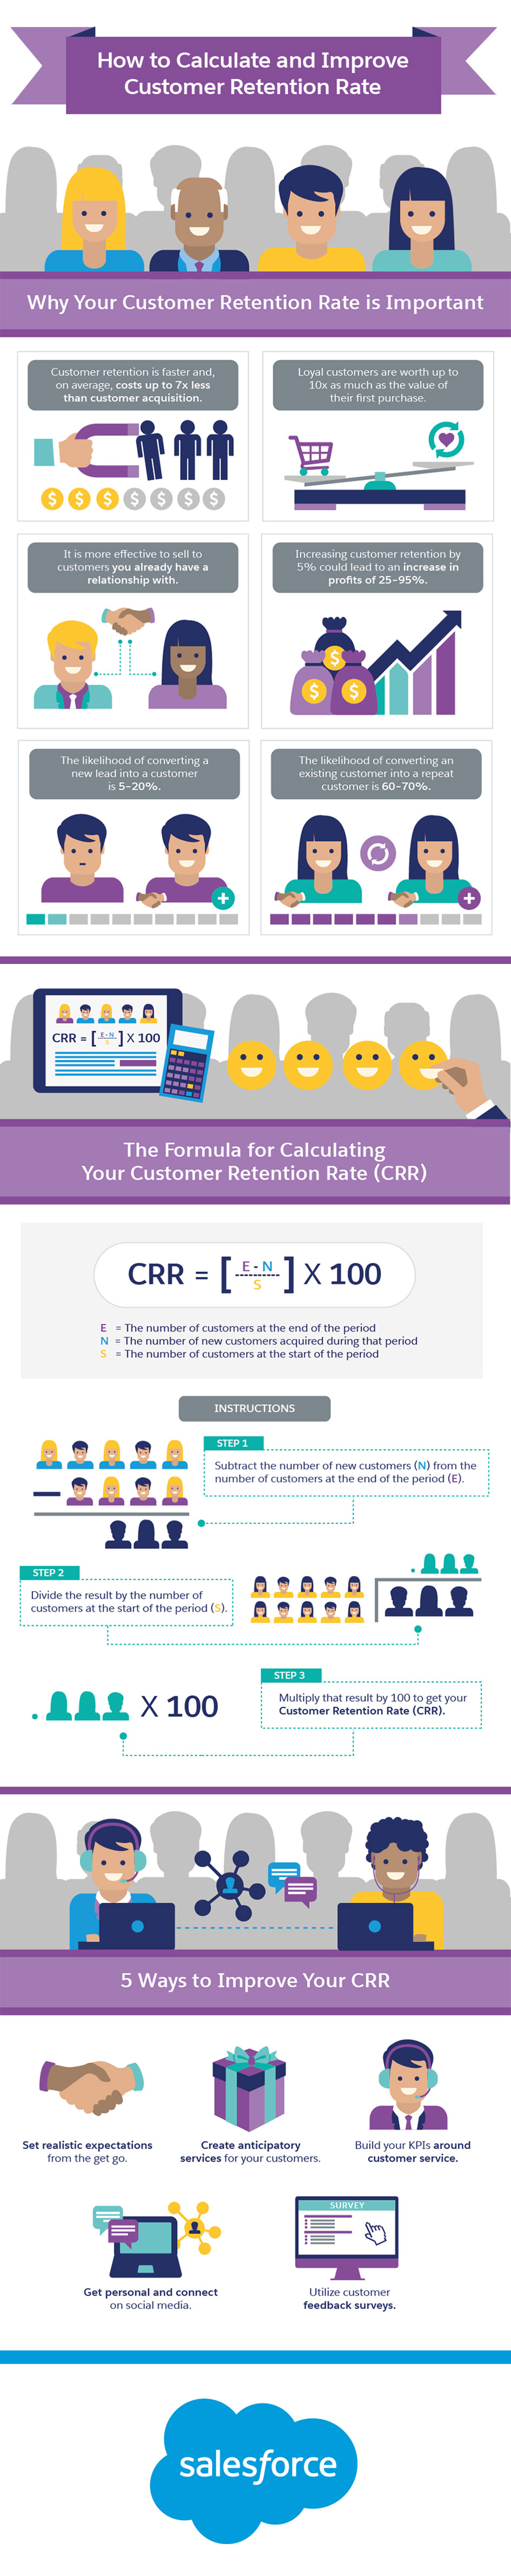 How to Calculate and Improve Customer Retention Rate Infographic